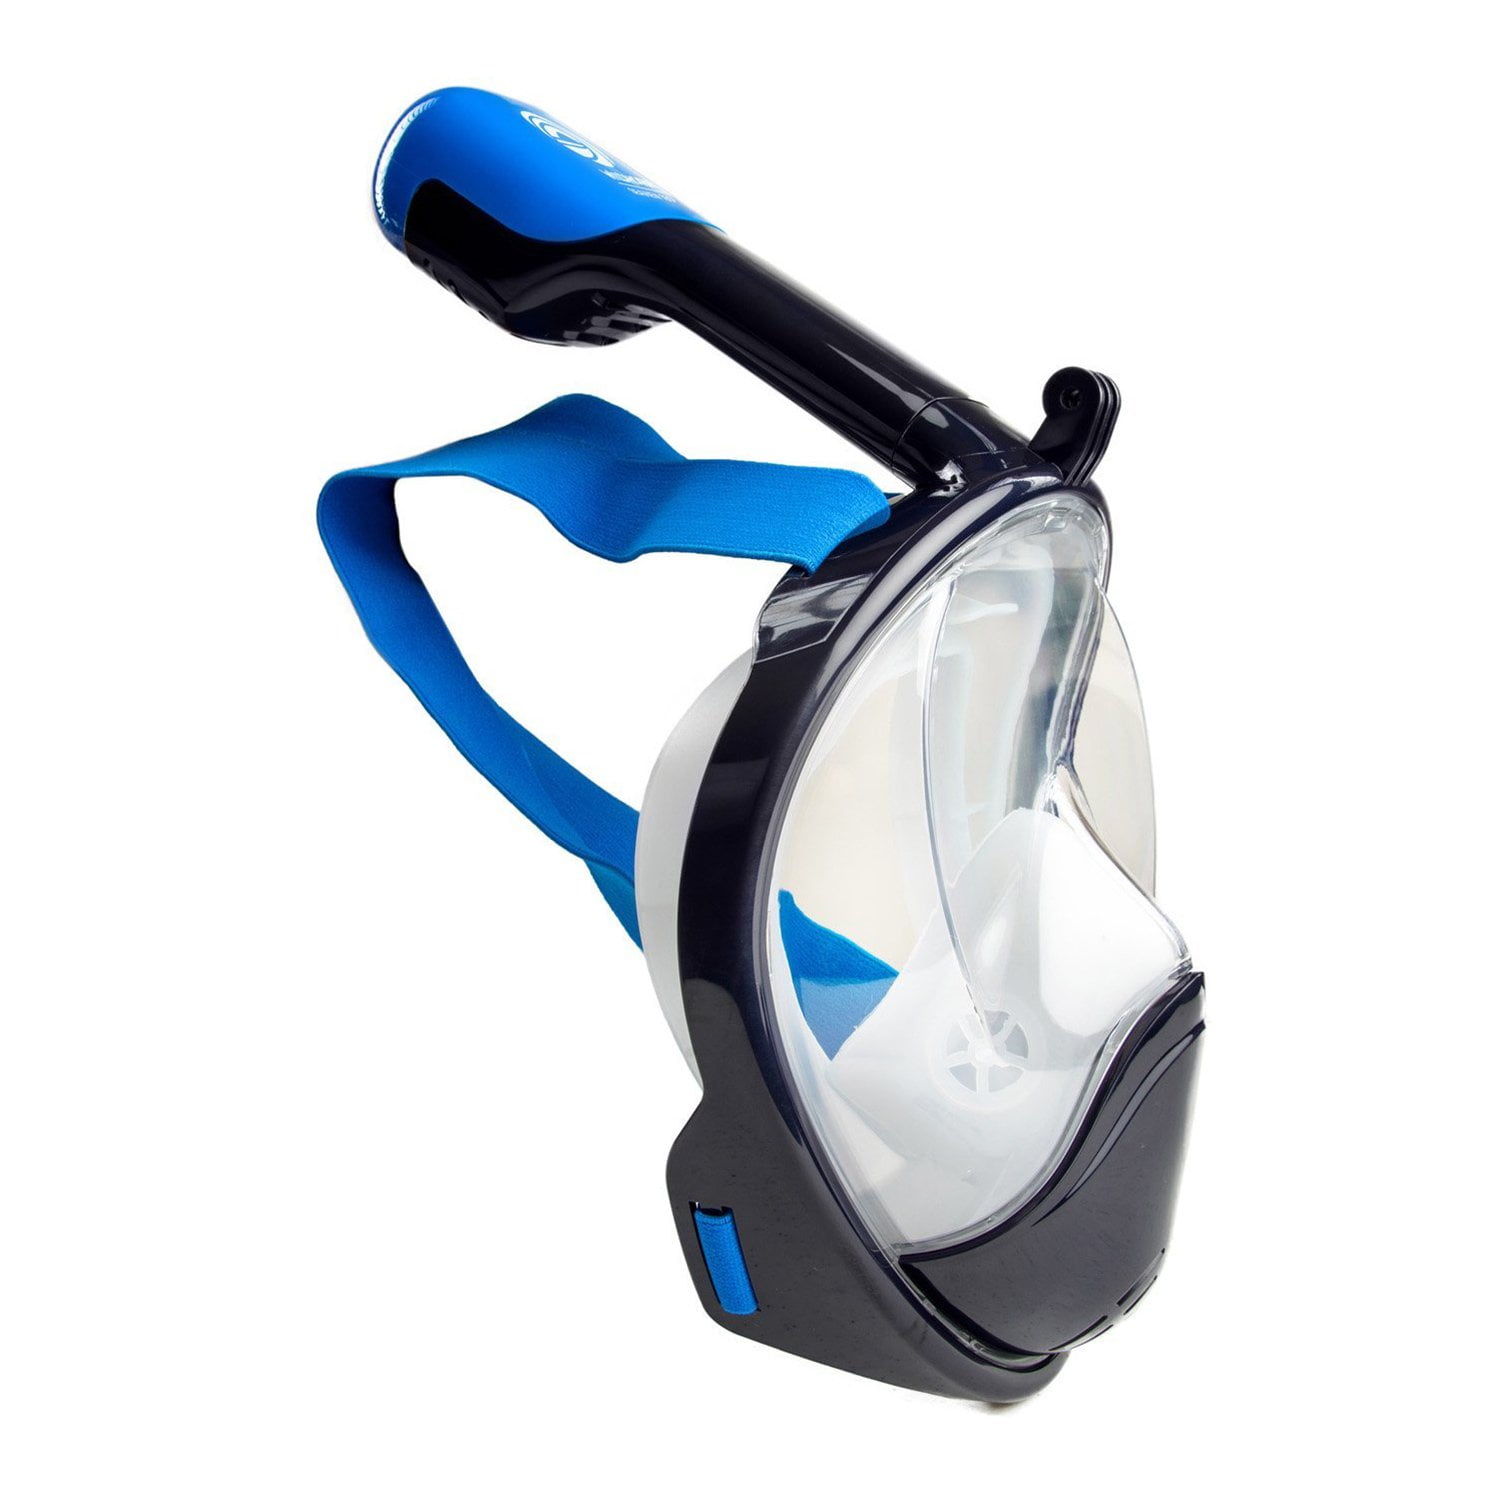 Details about   WildHorn Outfitters Seaview 180 Degree Panoramic Snorkel Mask Navy Blue/Gray XS 